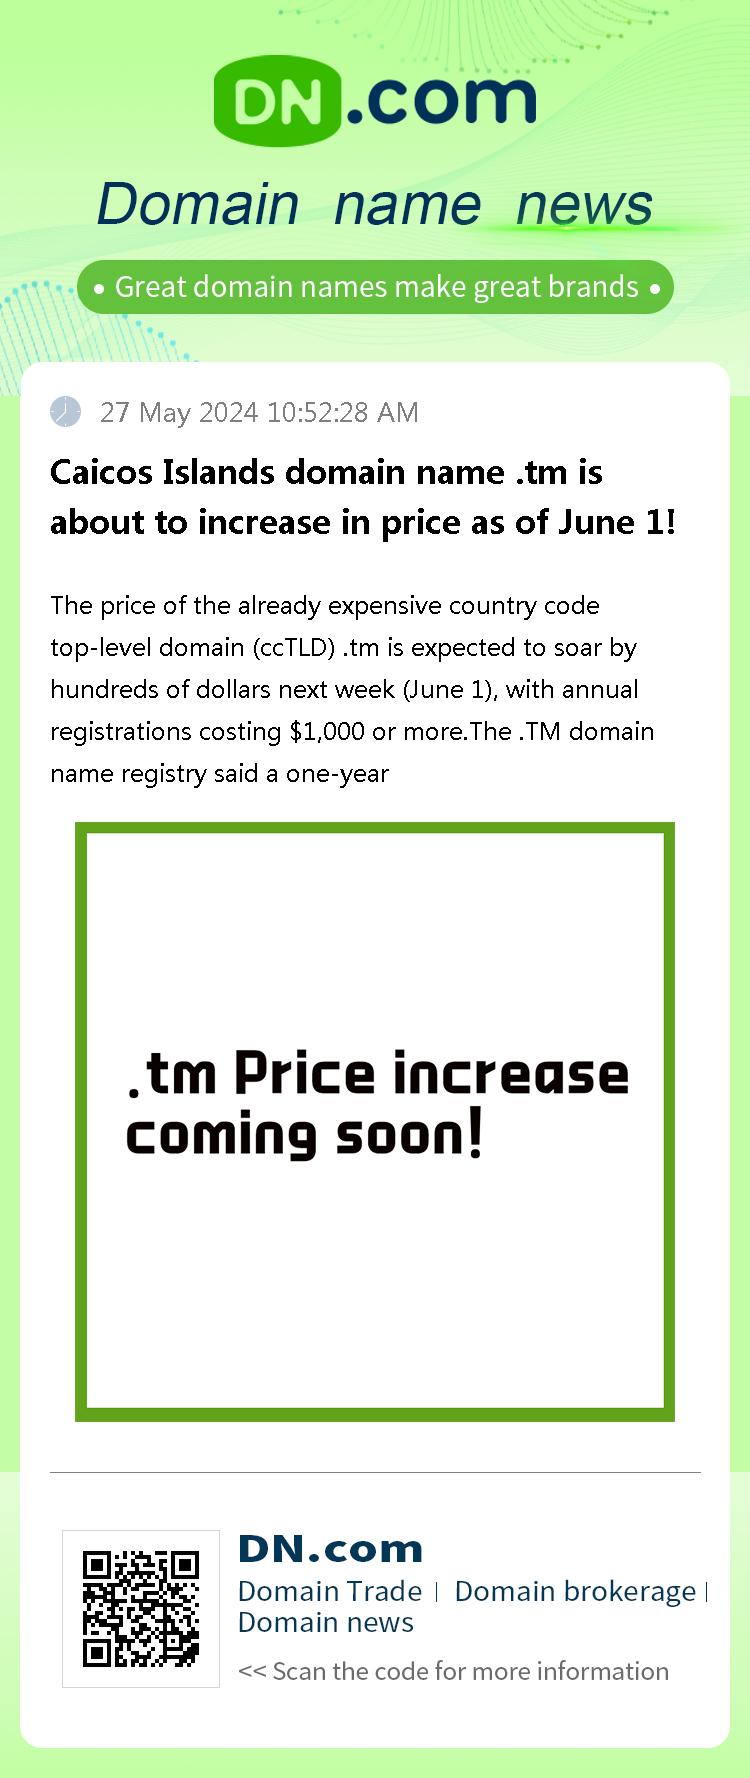 Caicos Islands domain name .tm is about to increase in price as of June 1!